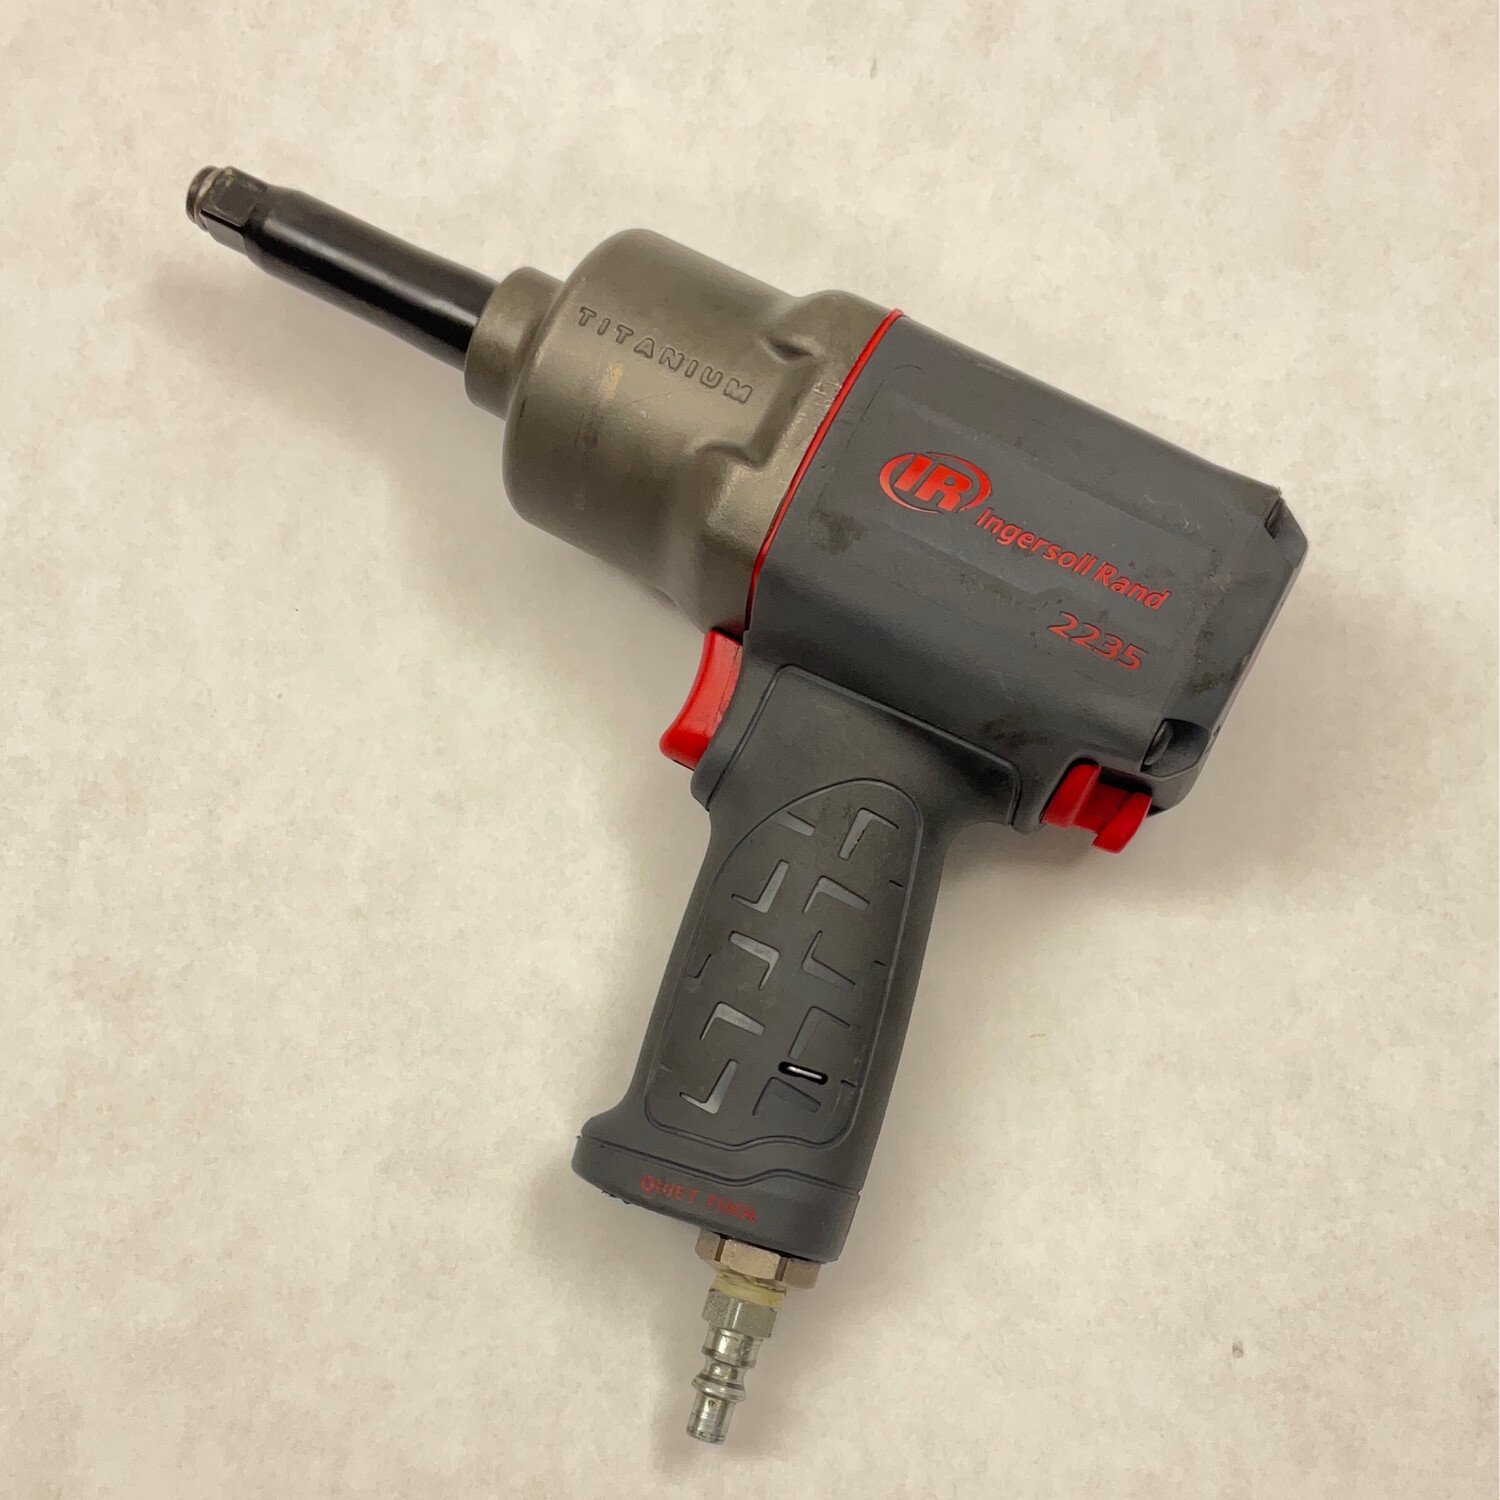 Ingersoll Rand 1/2” Air Impact Wrench, 2235QTMAX2 - Shop - Tool Swapper